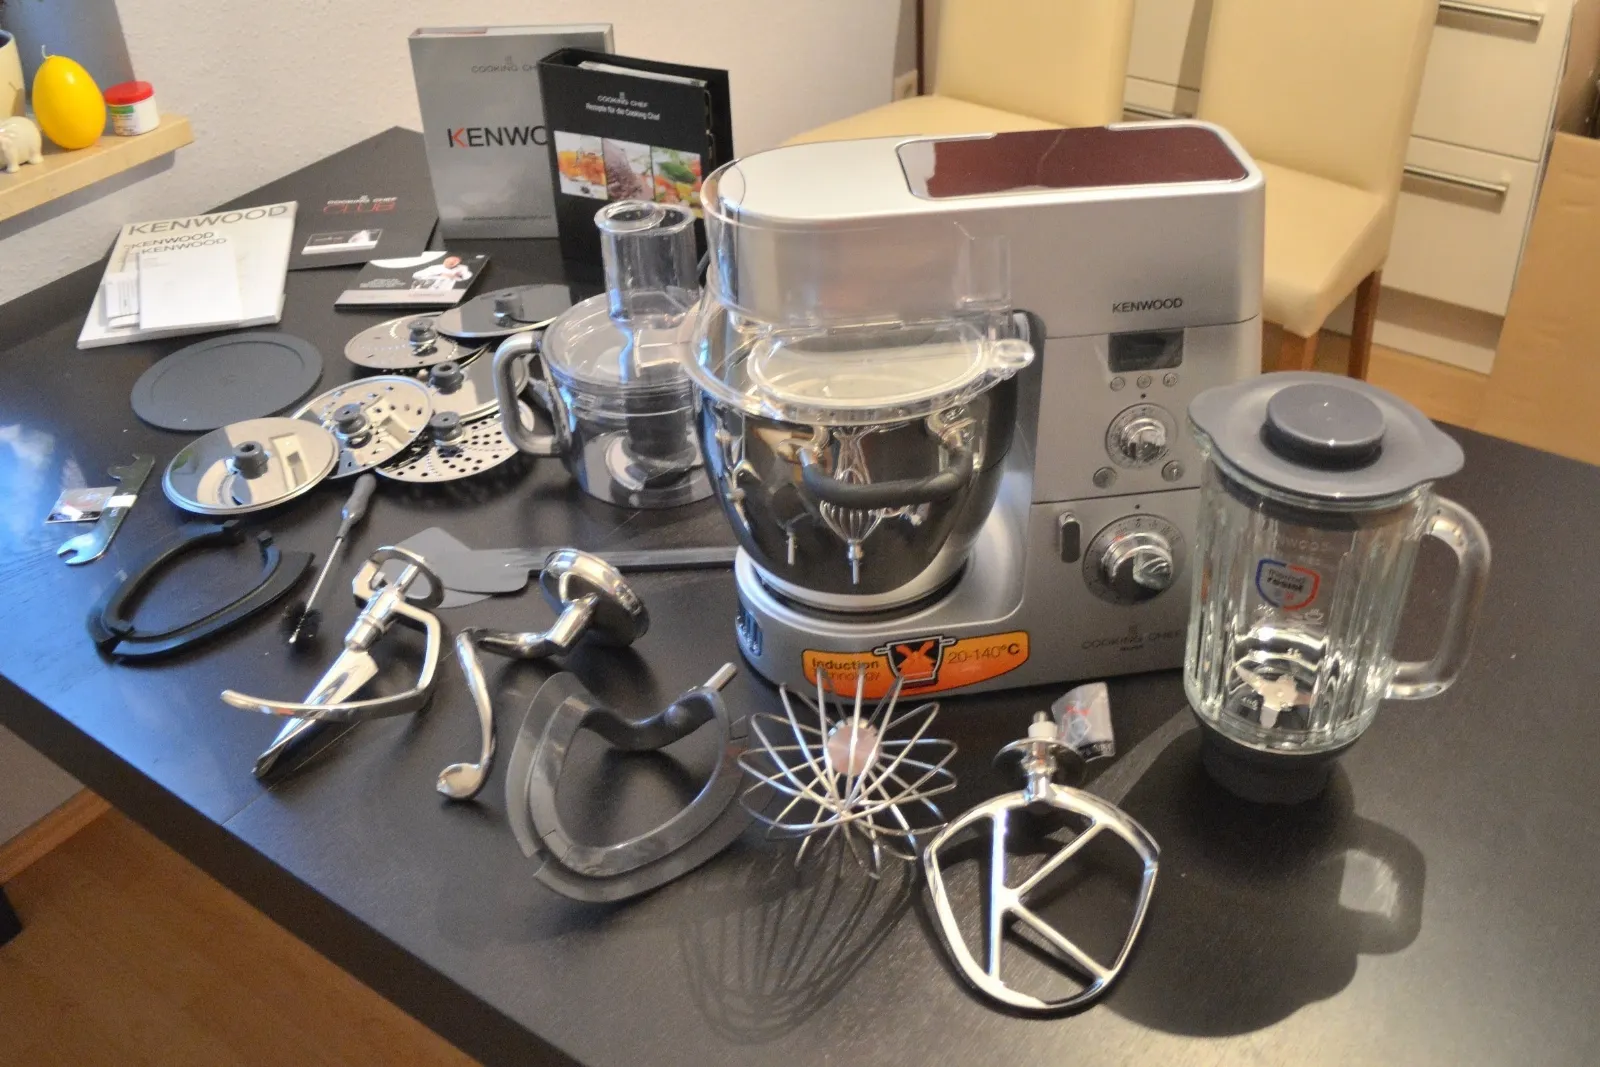 Caratteristiche del cooking chef robot kenwood